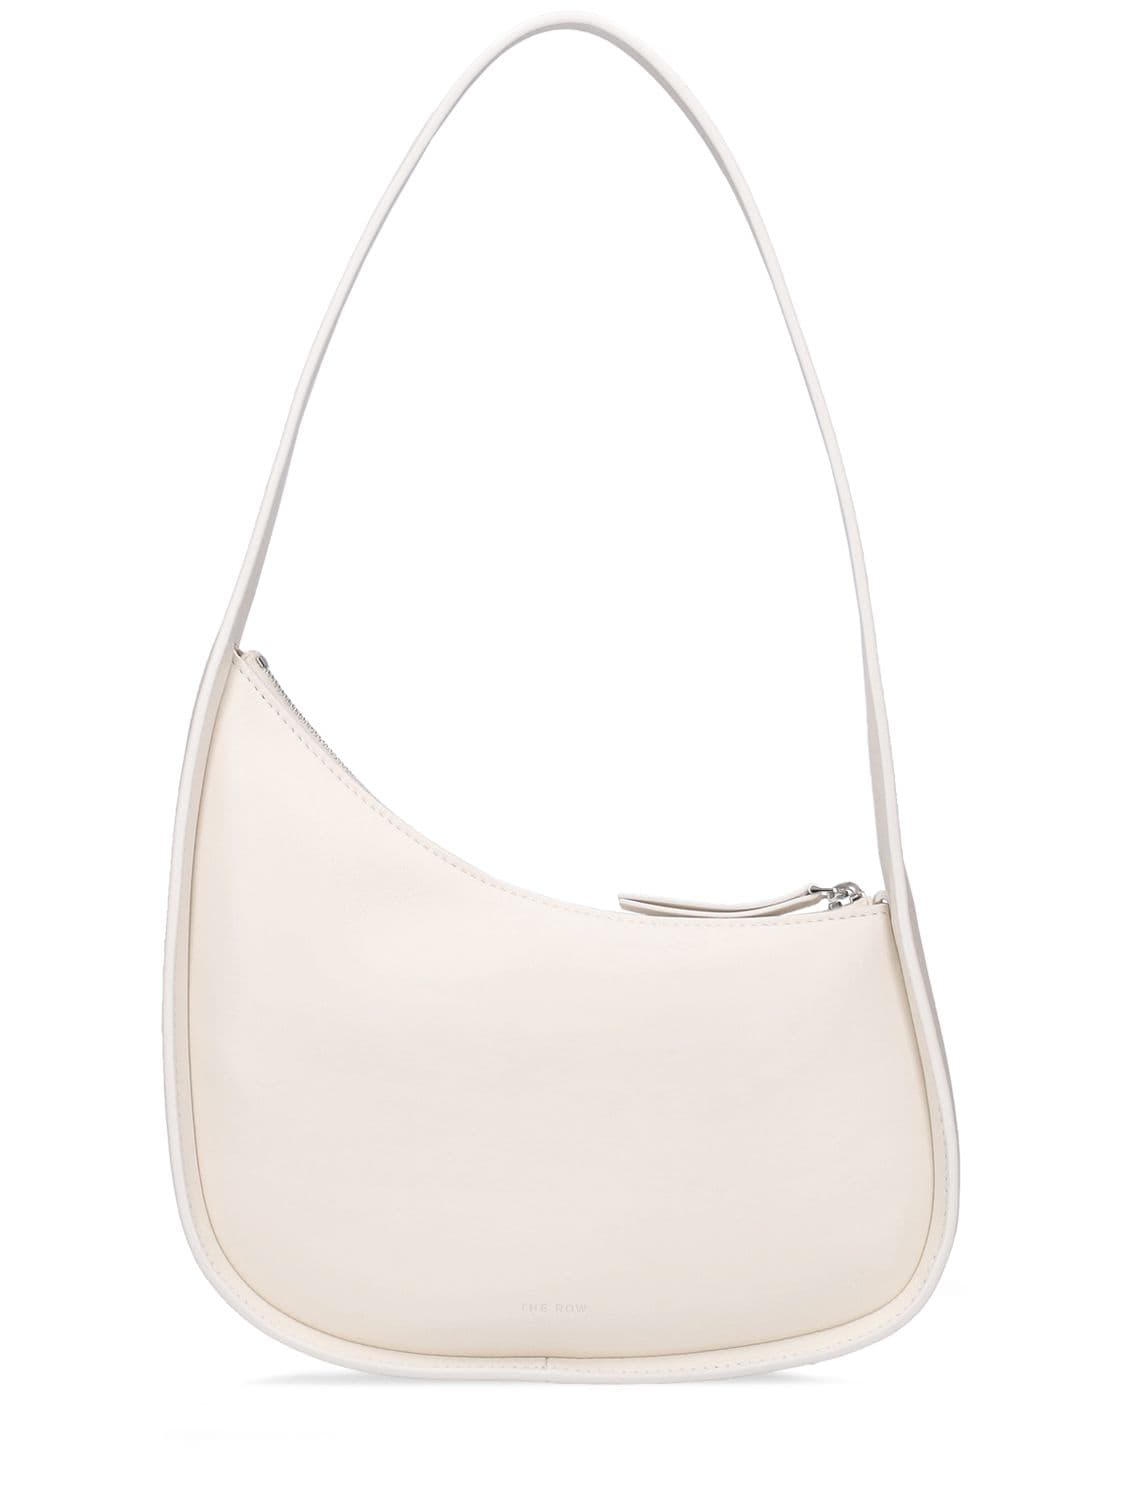 THE ROW SMOOTH LEATHER HALF MOON SHOULDER BAG